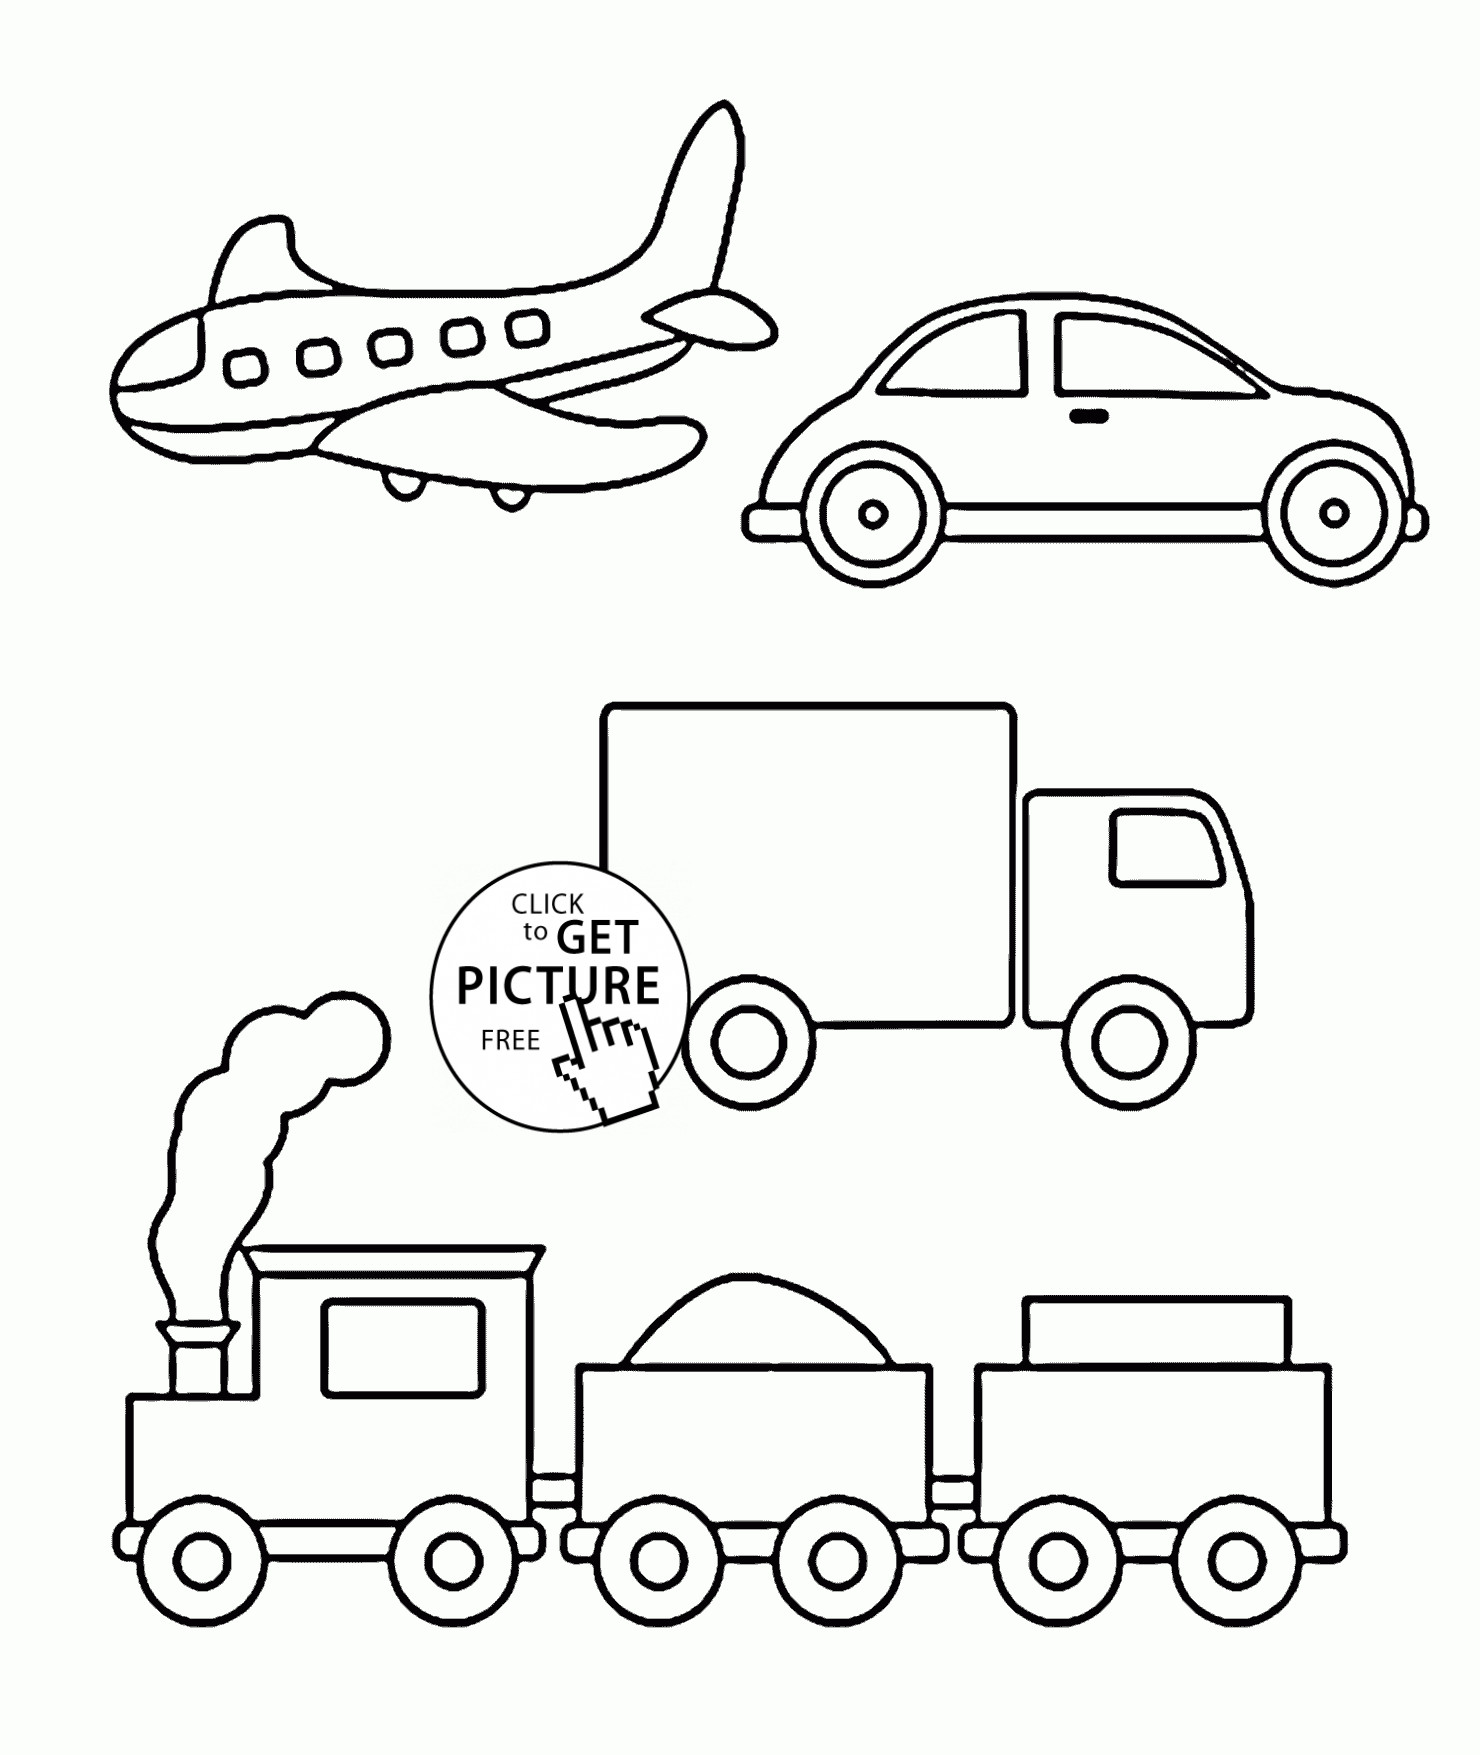 Transportation Coloring Pages For Toddlers
 Simple coloring pages of Transportation for toddlers